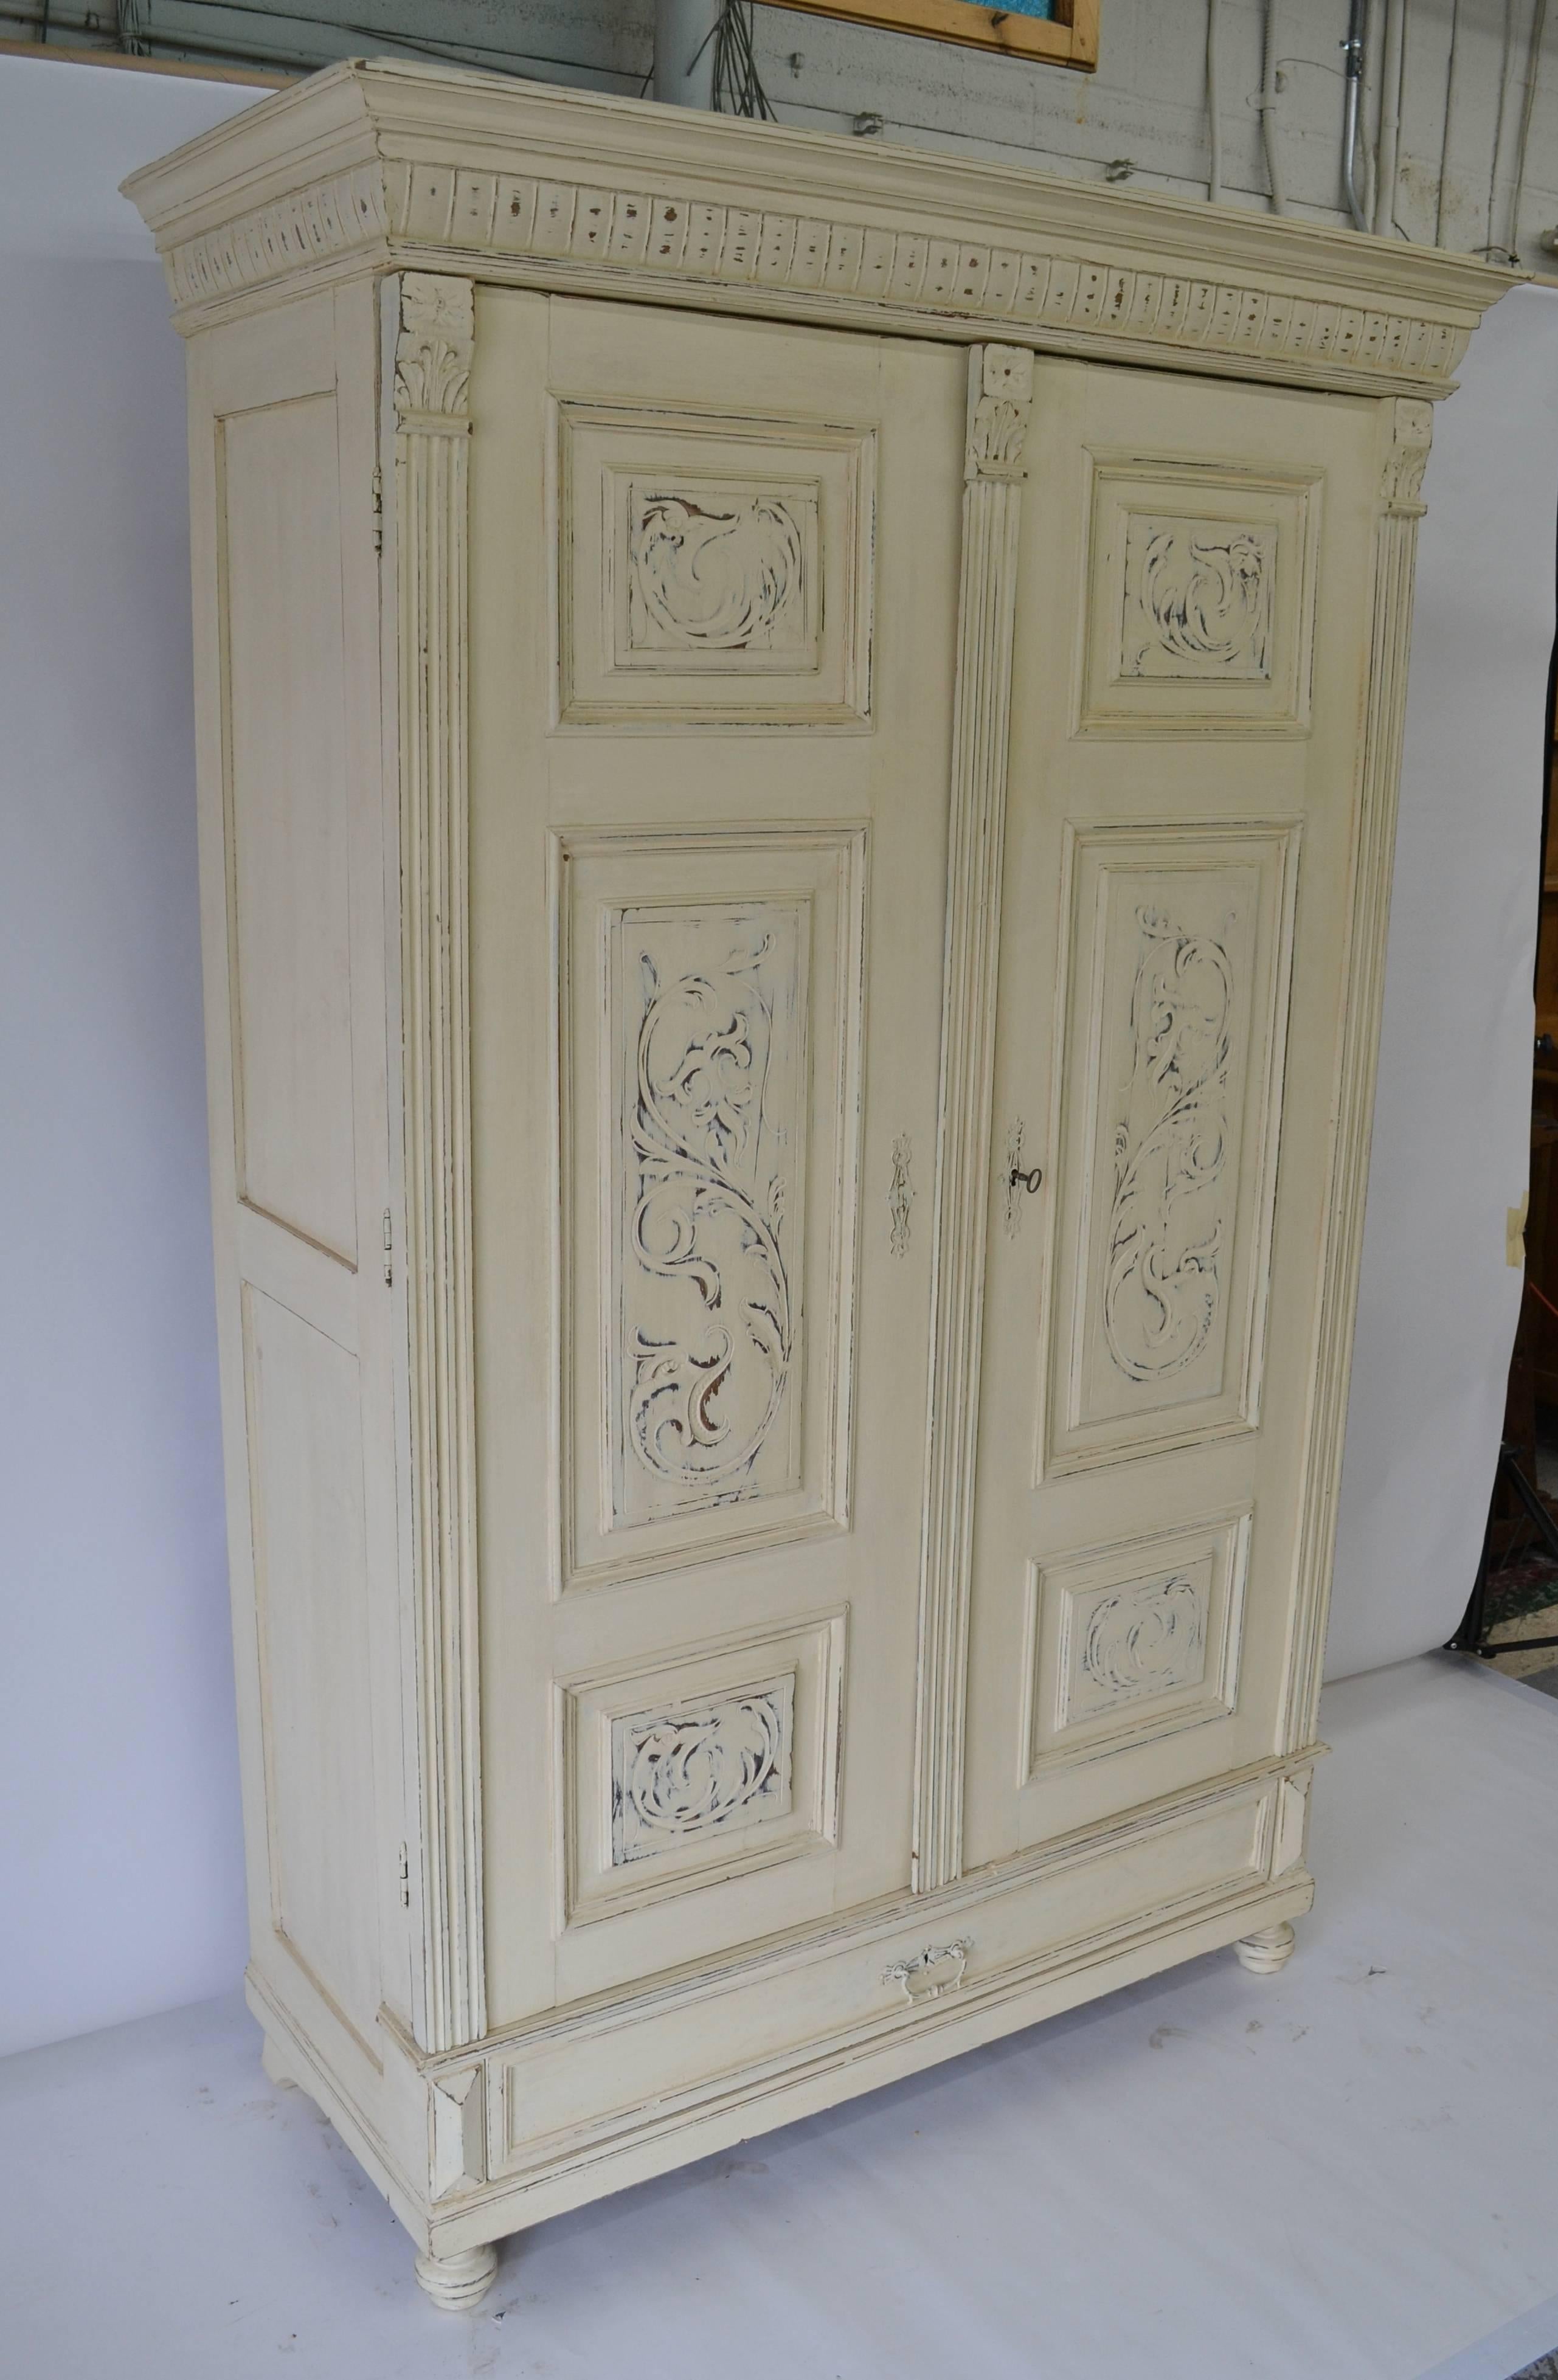 This handsome pine and oak two door armoire has three carved raised panels on each oak door, flanked and separated by applied fluting and acanthus leaf corbels. The doors open to a full 180 degrees, making this an ideal piece for housing a small TV.